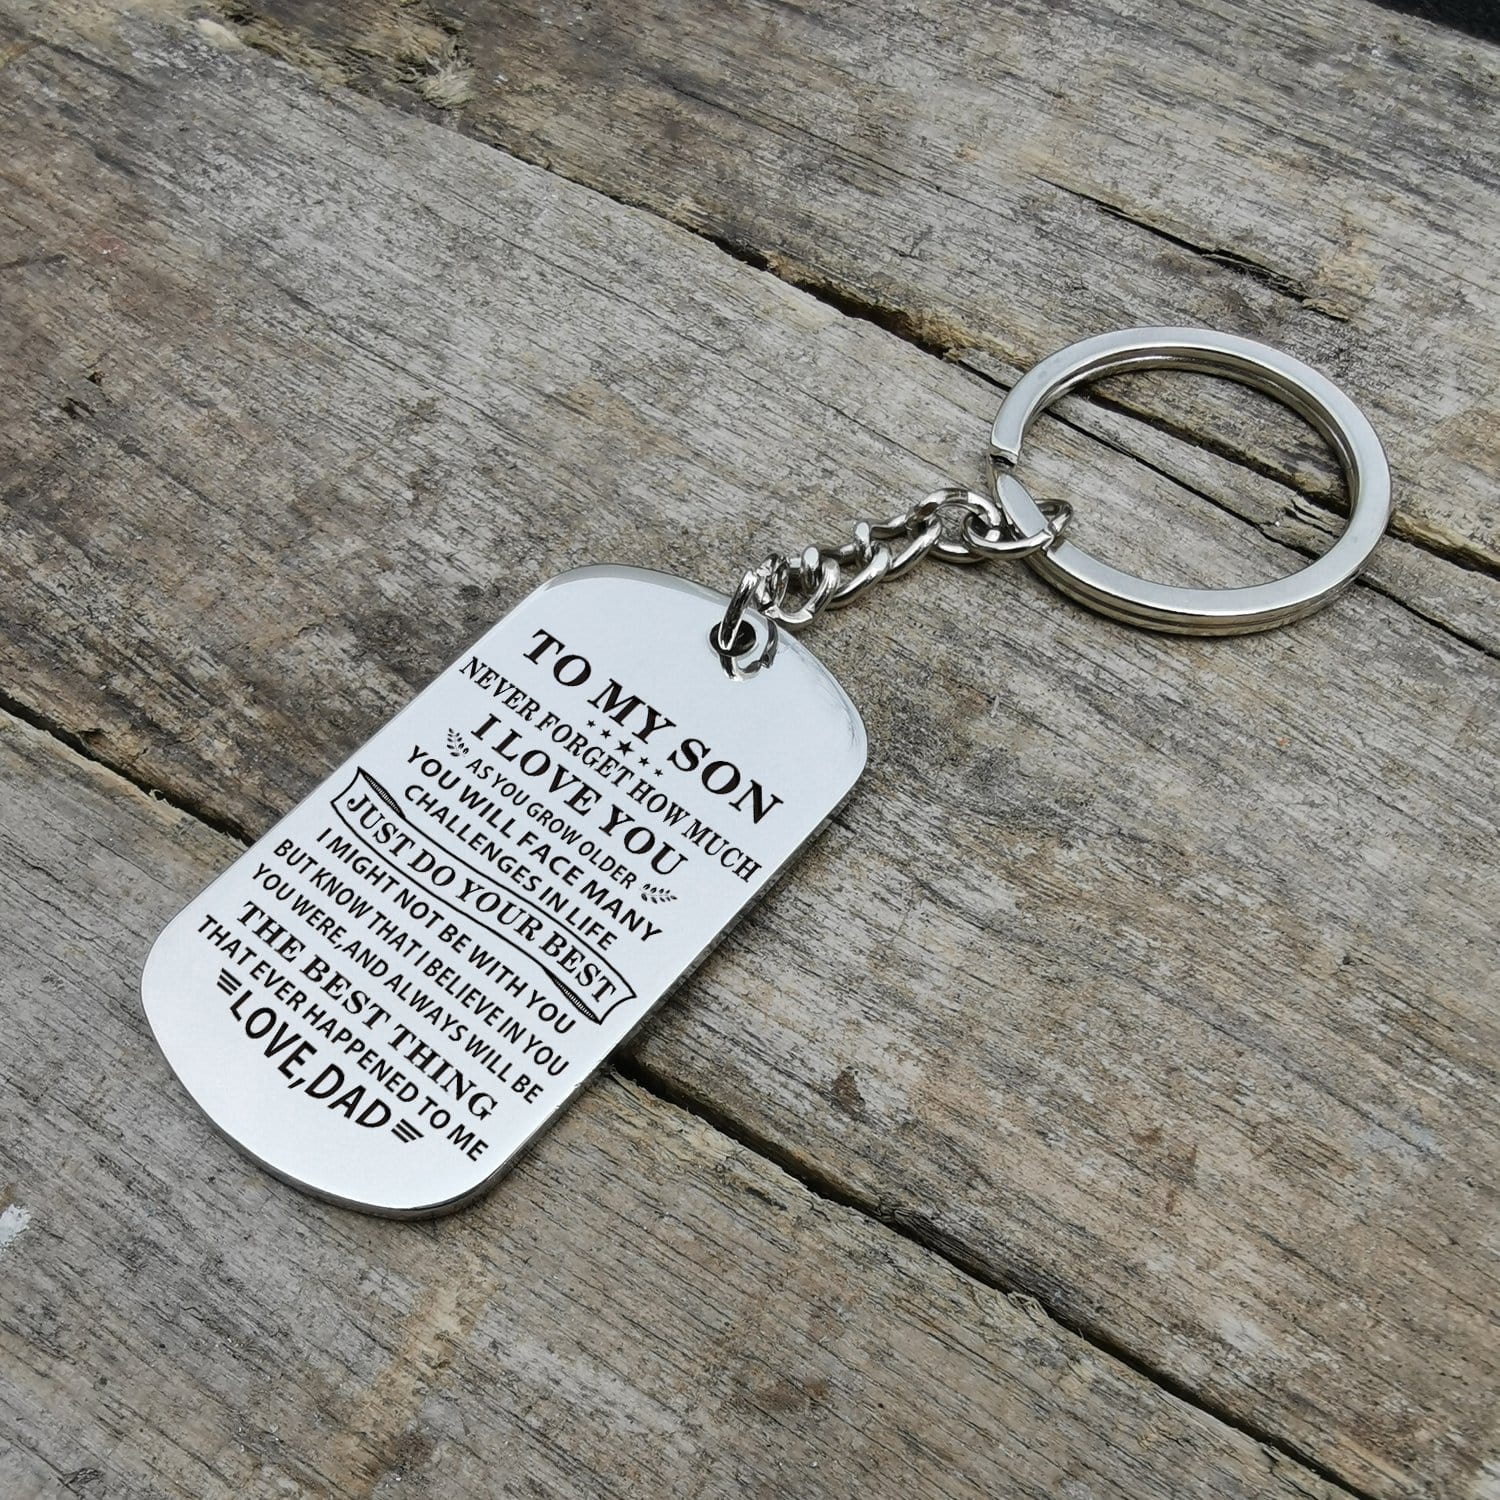 Keychains Dad To Son - Just Do Your Best Personalized Keychain GiveMe-Gifts